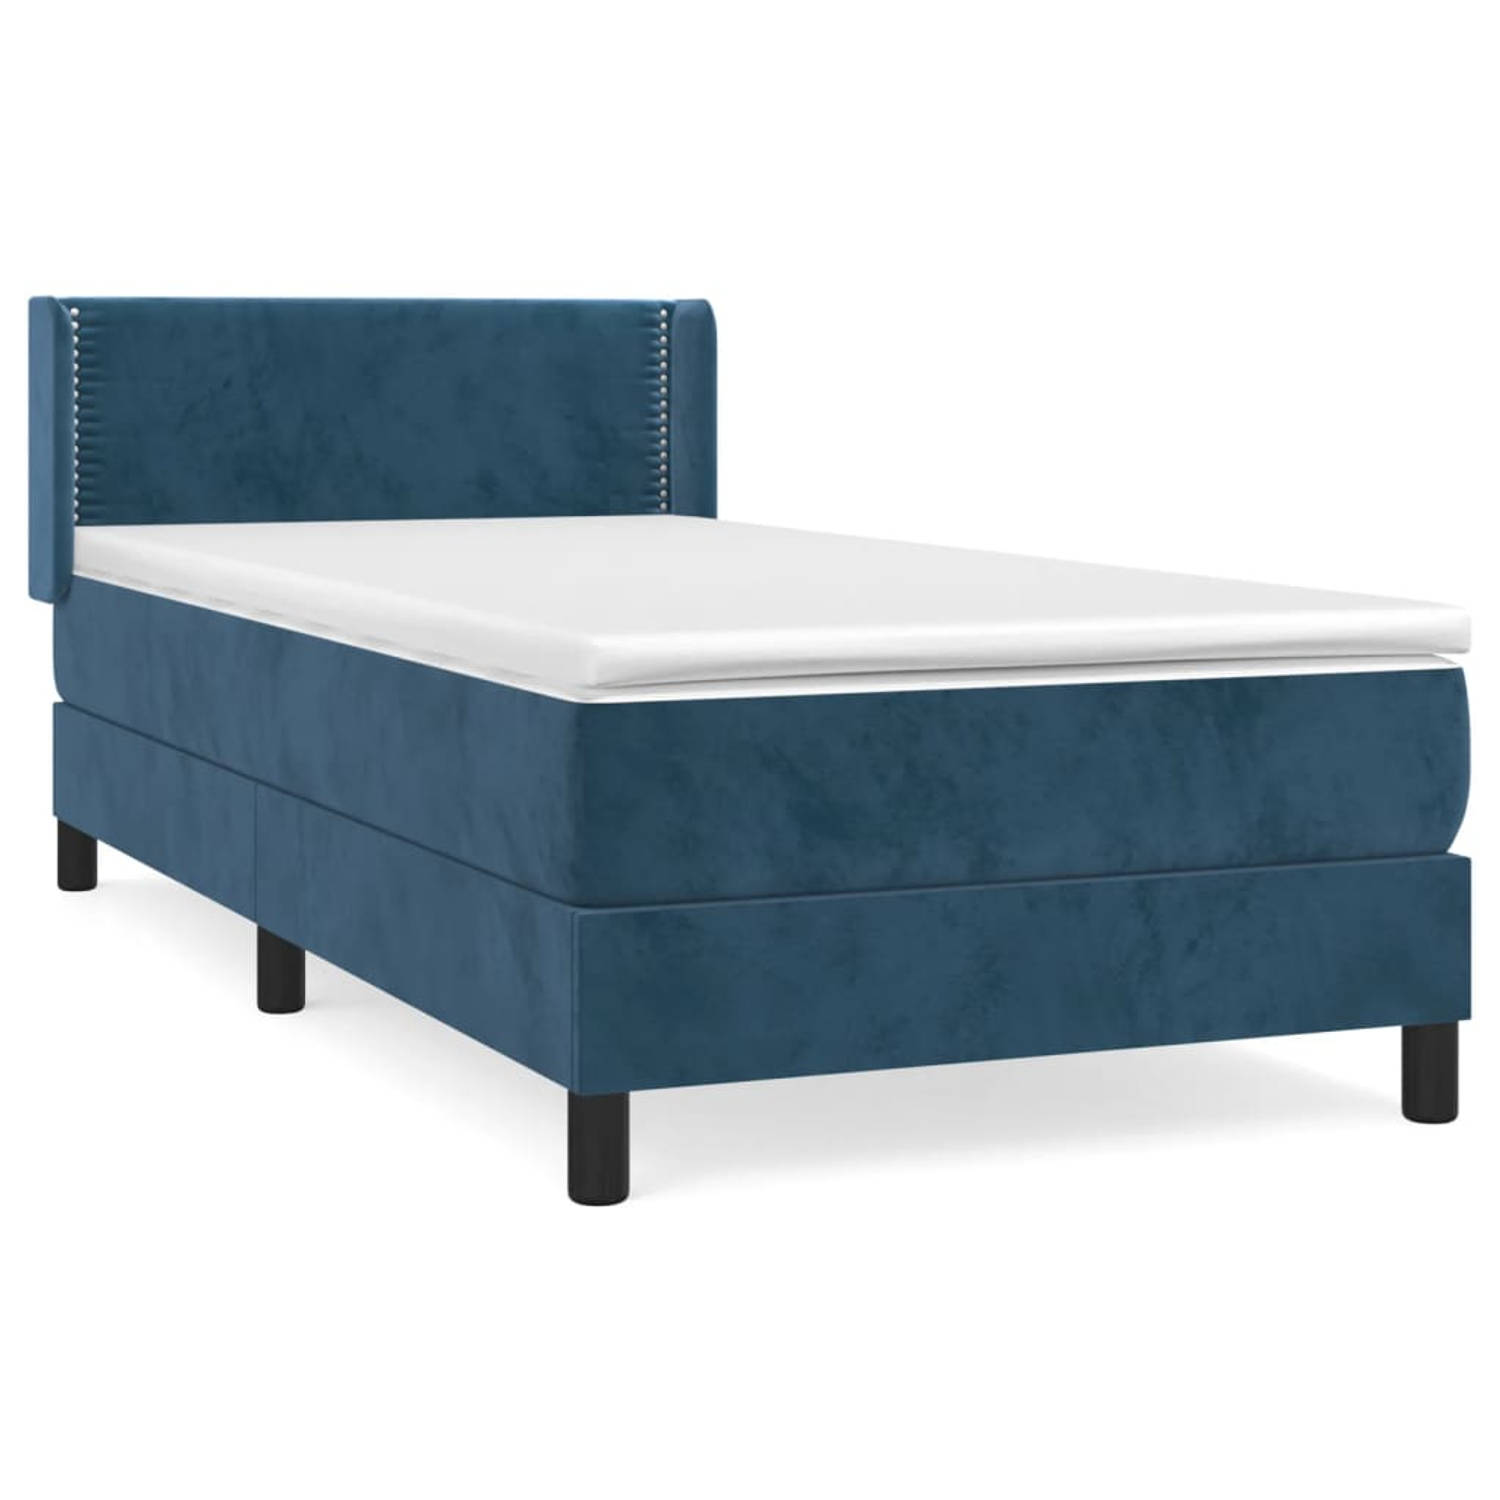 The Living Store Boxspringbed - fluweel - 193 x 93 x 78/88 cm - donkerblauw